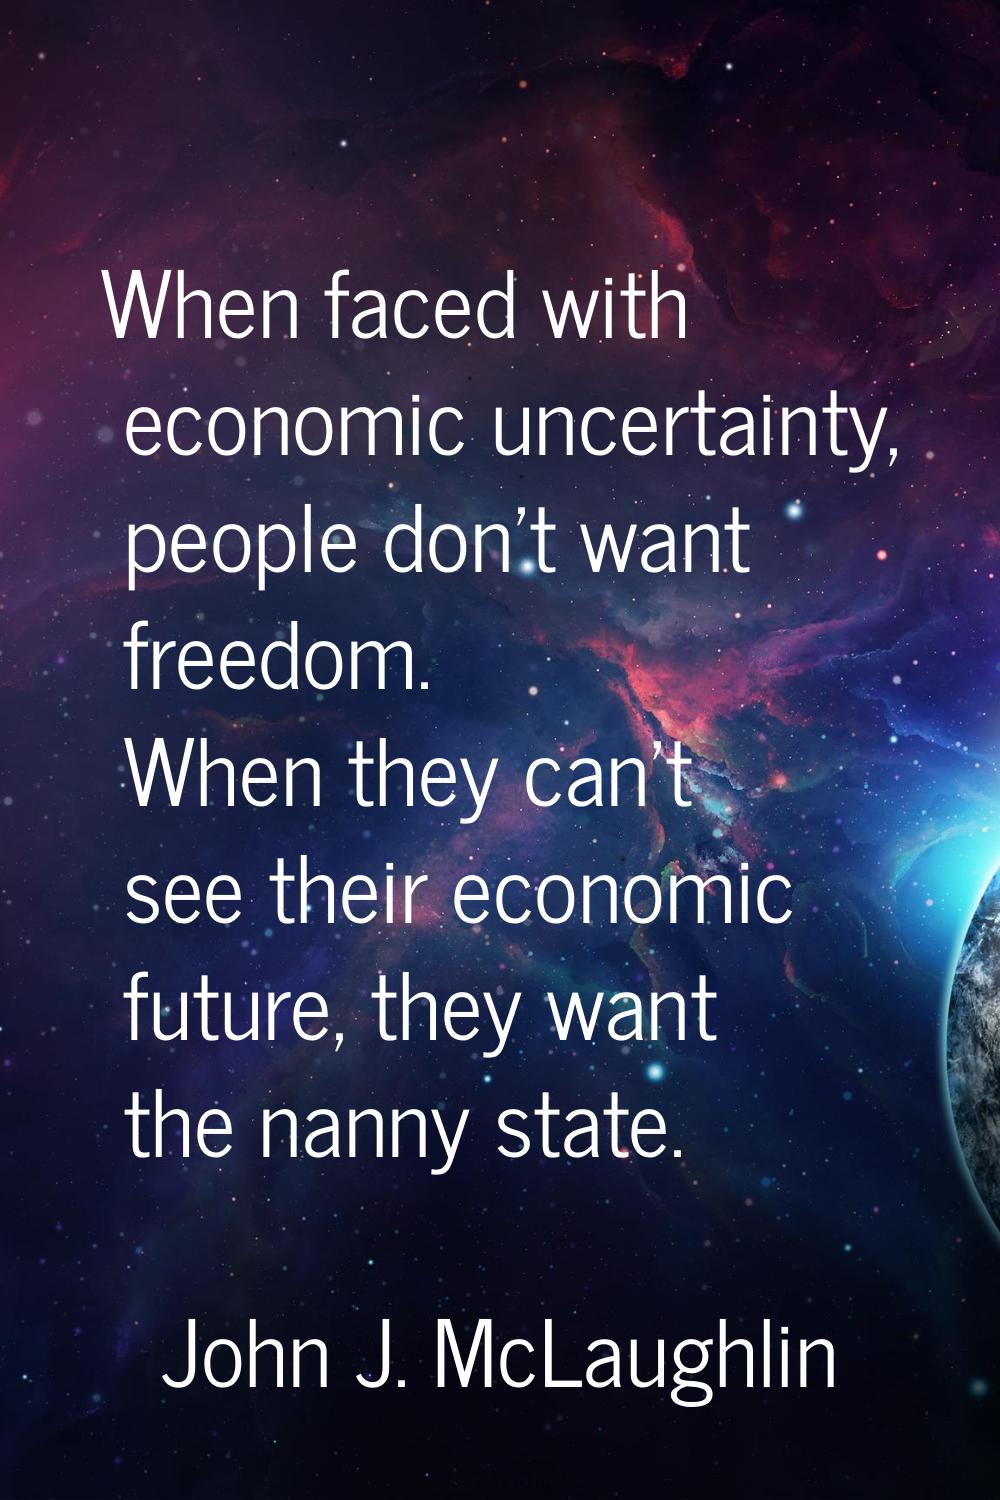 When faced with economic uncertainty, people don't want freedom. When they can't see their economic